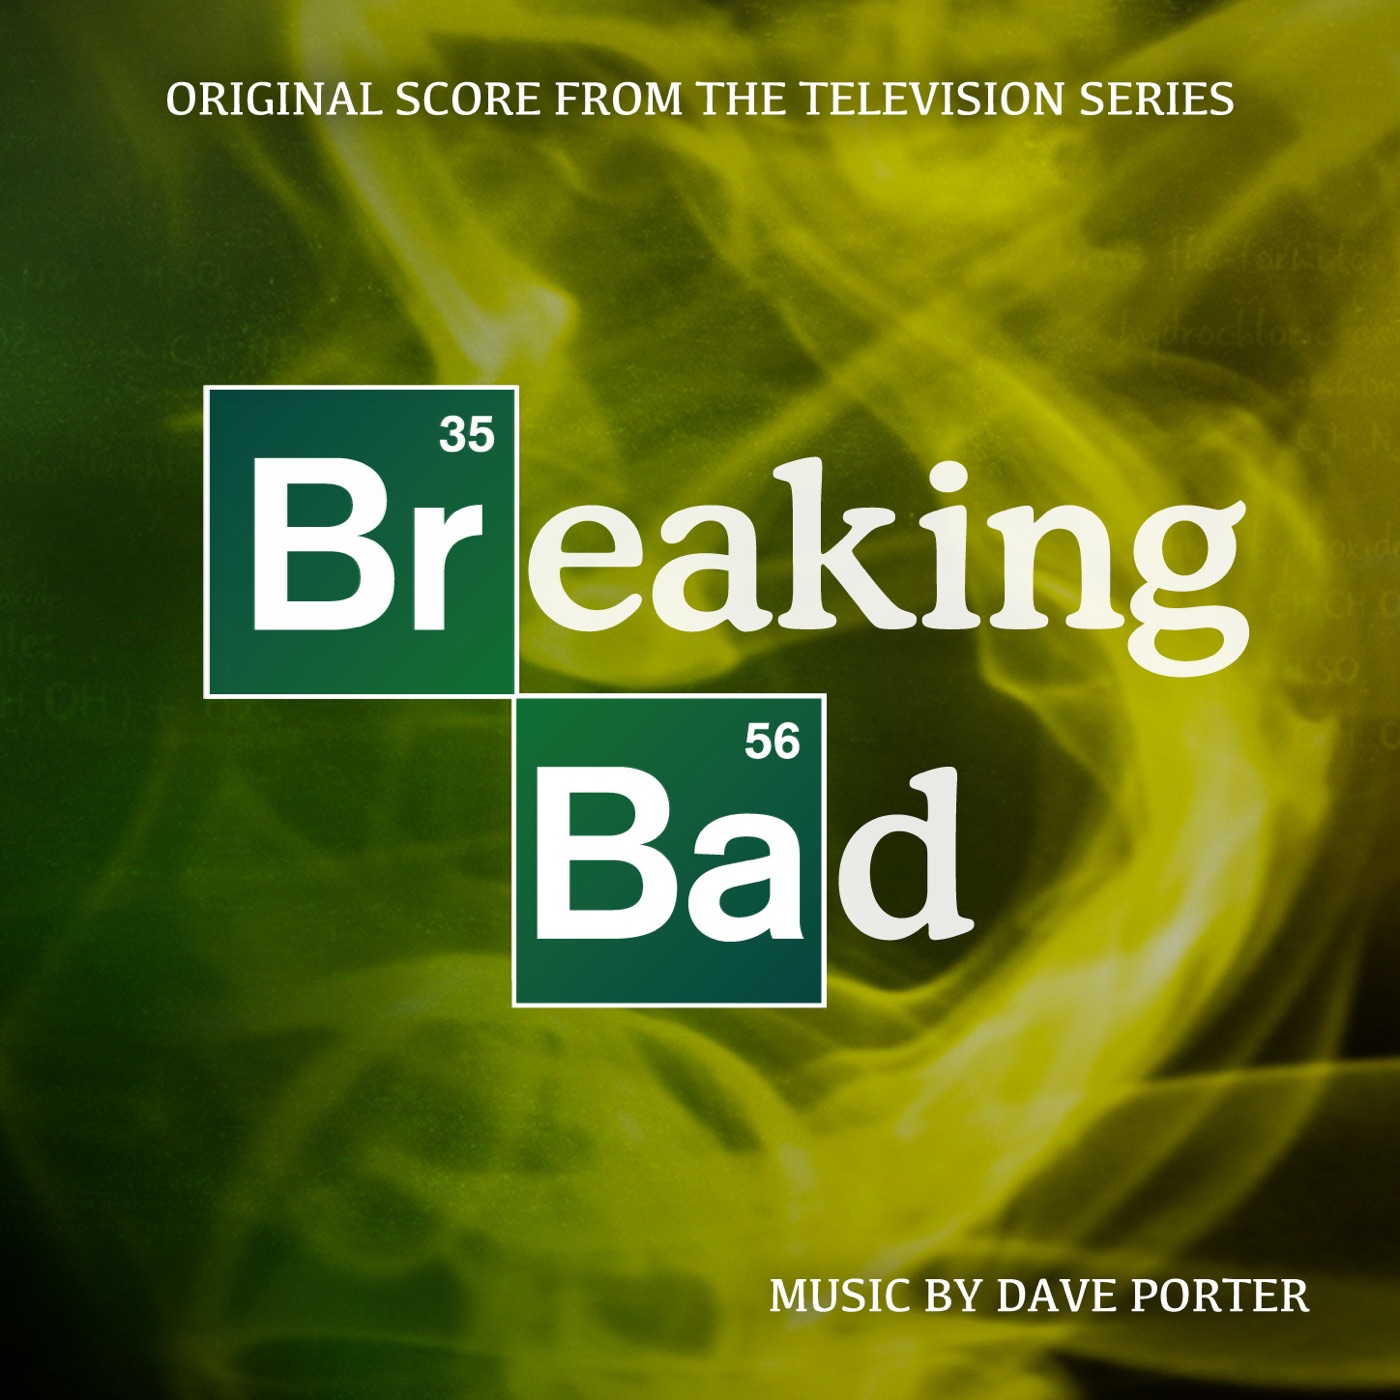 Breaking Bad (Original Score from the Television Series) by Dave Porter